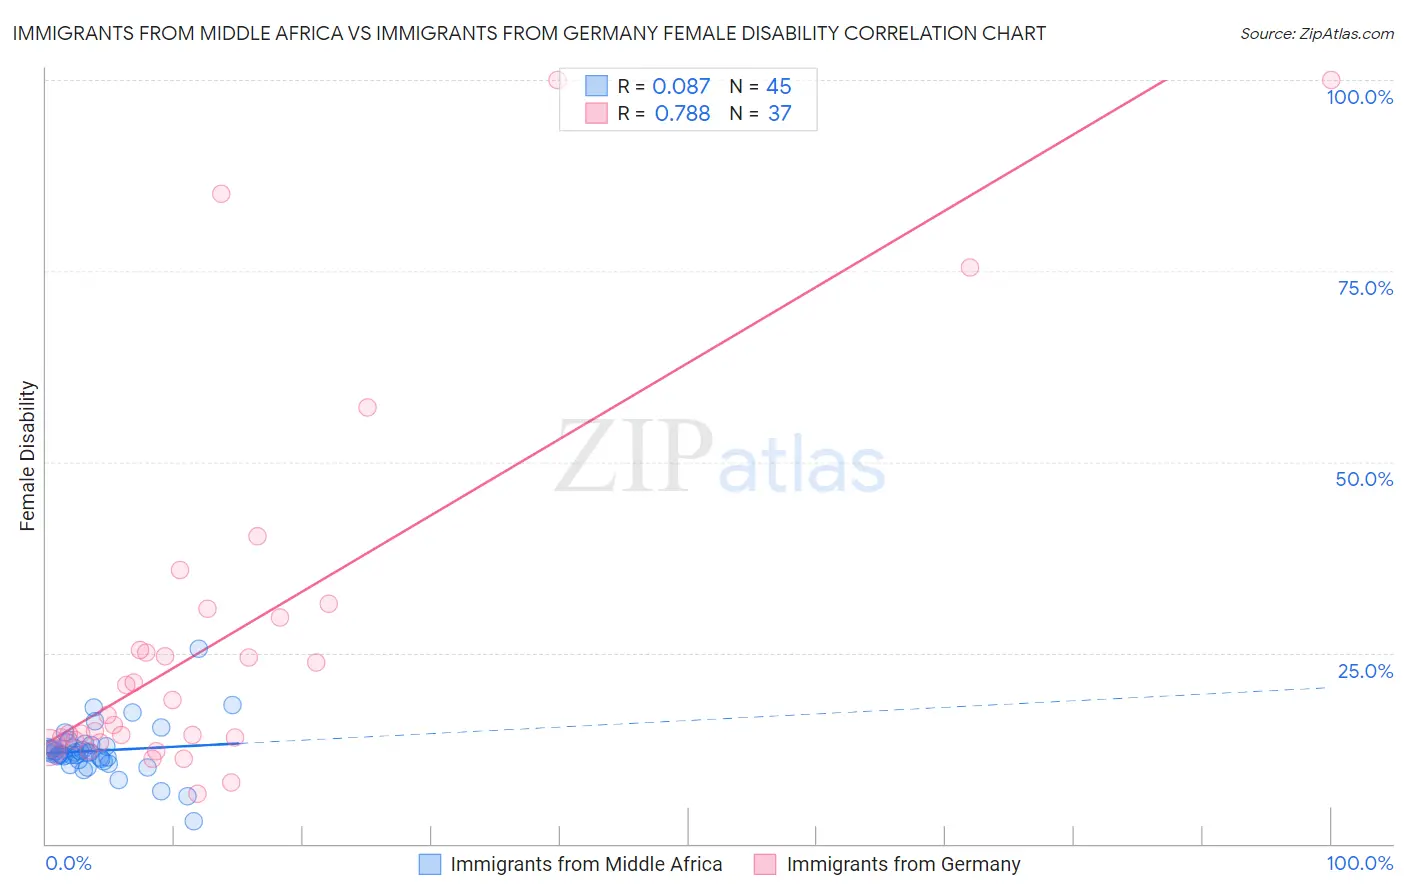 Immigrants from Middle Africa vs Immigrants from Germany Female Disability